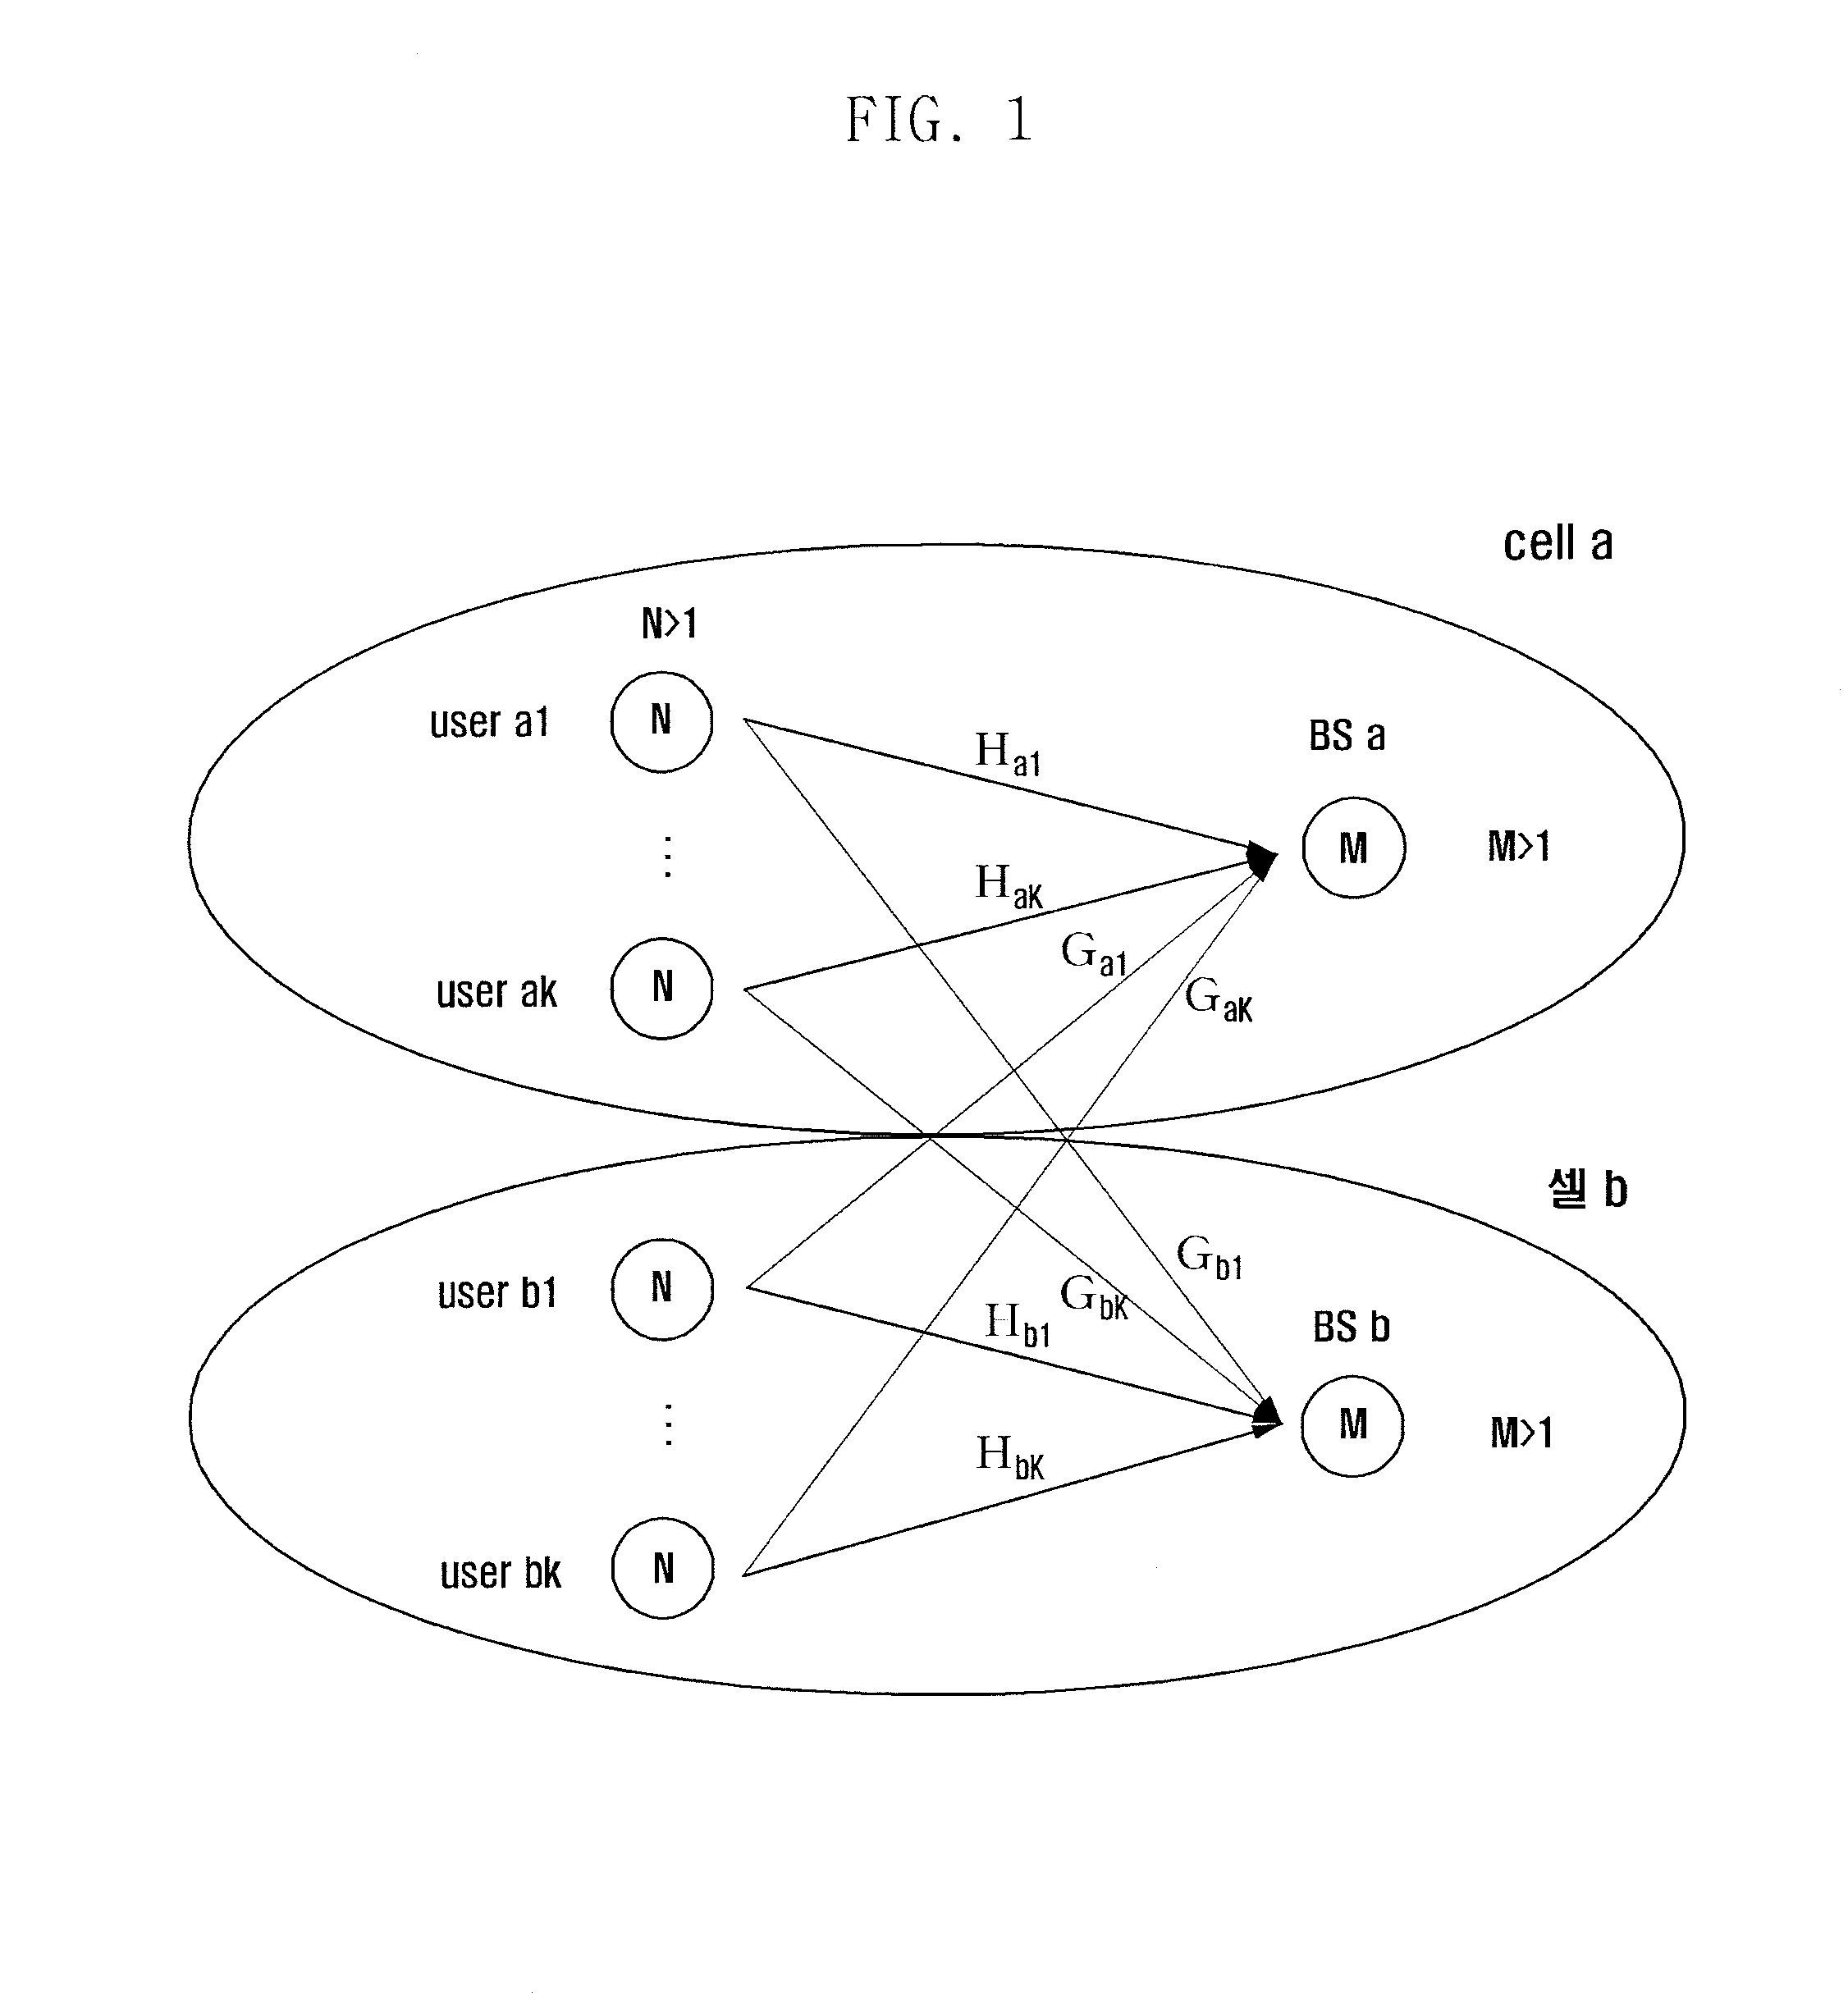 Method and apparatus for interference alignment in a wireless communication system